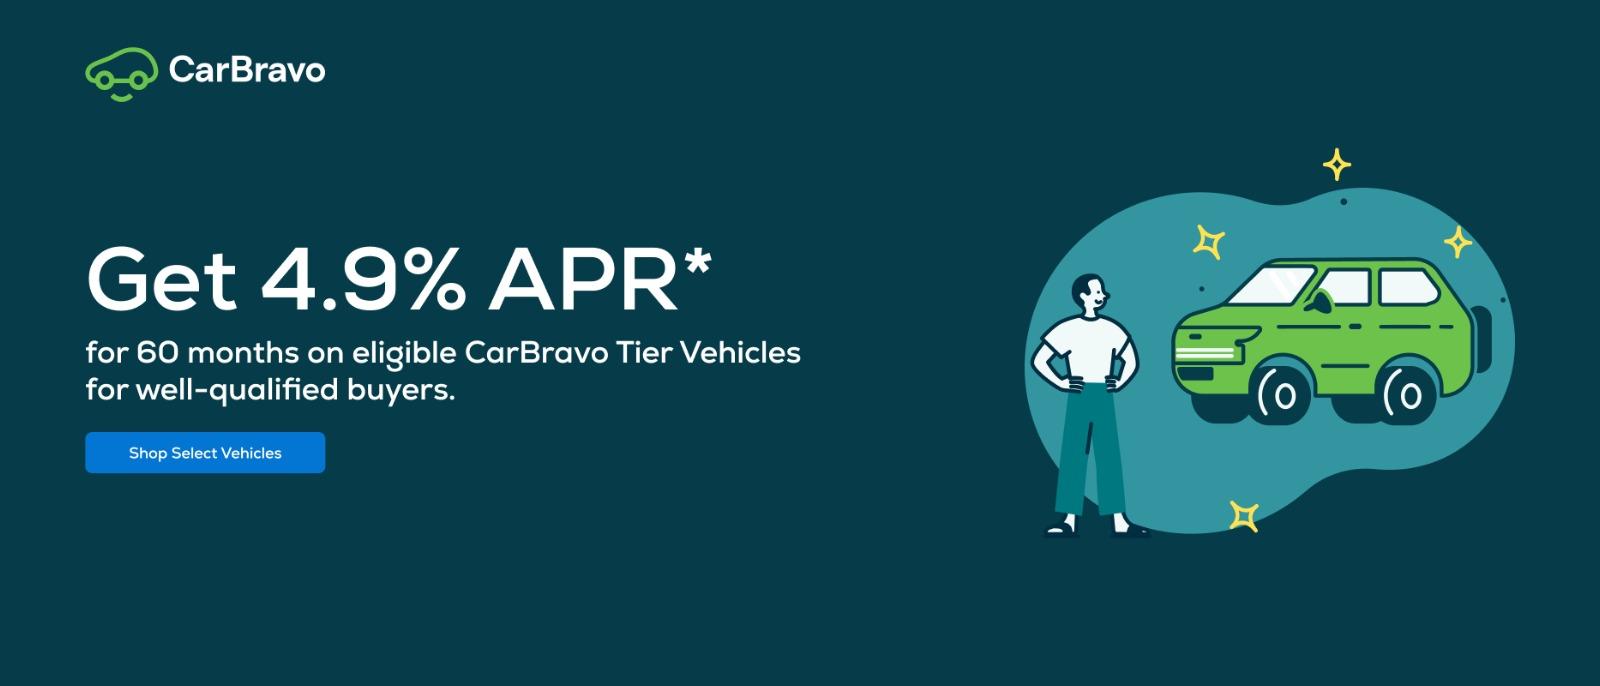 Get 4.9% APR* for 60 months on eligible Carbravo Tier Vehicles for well-qualified buyers